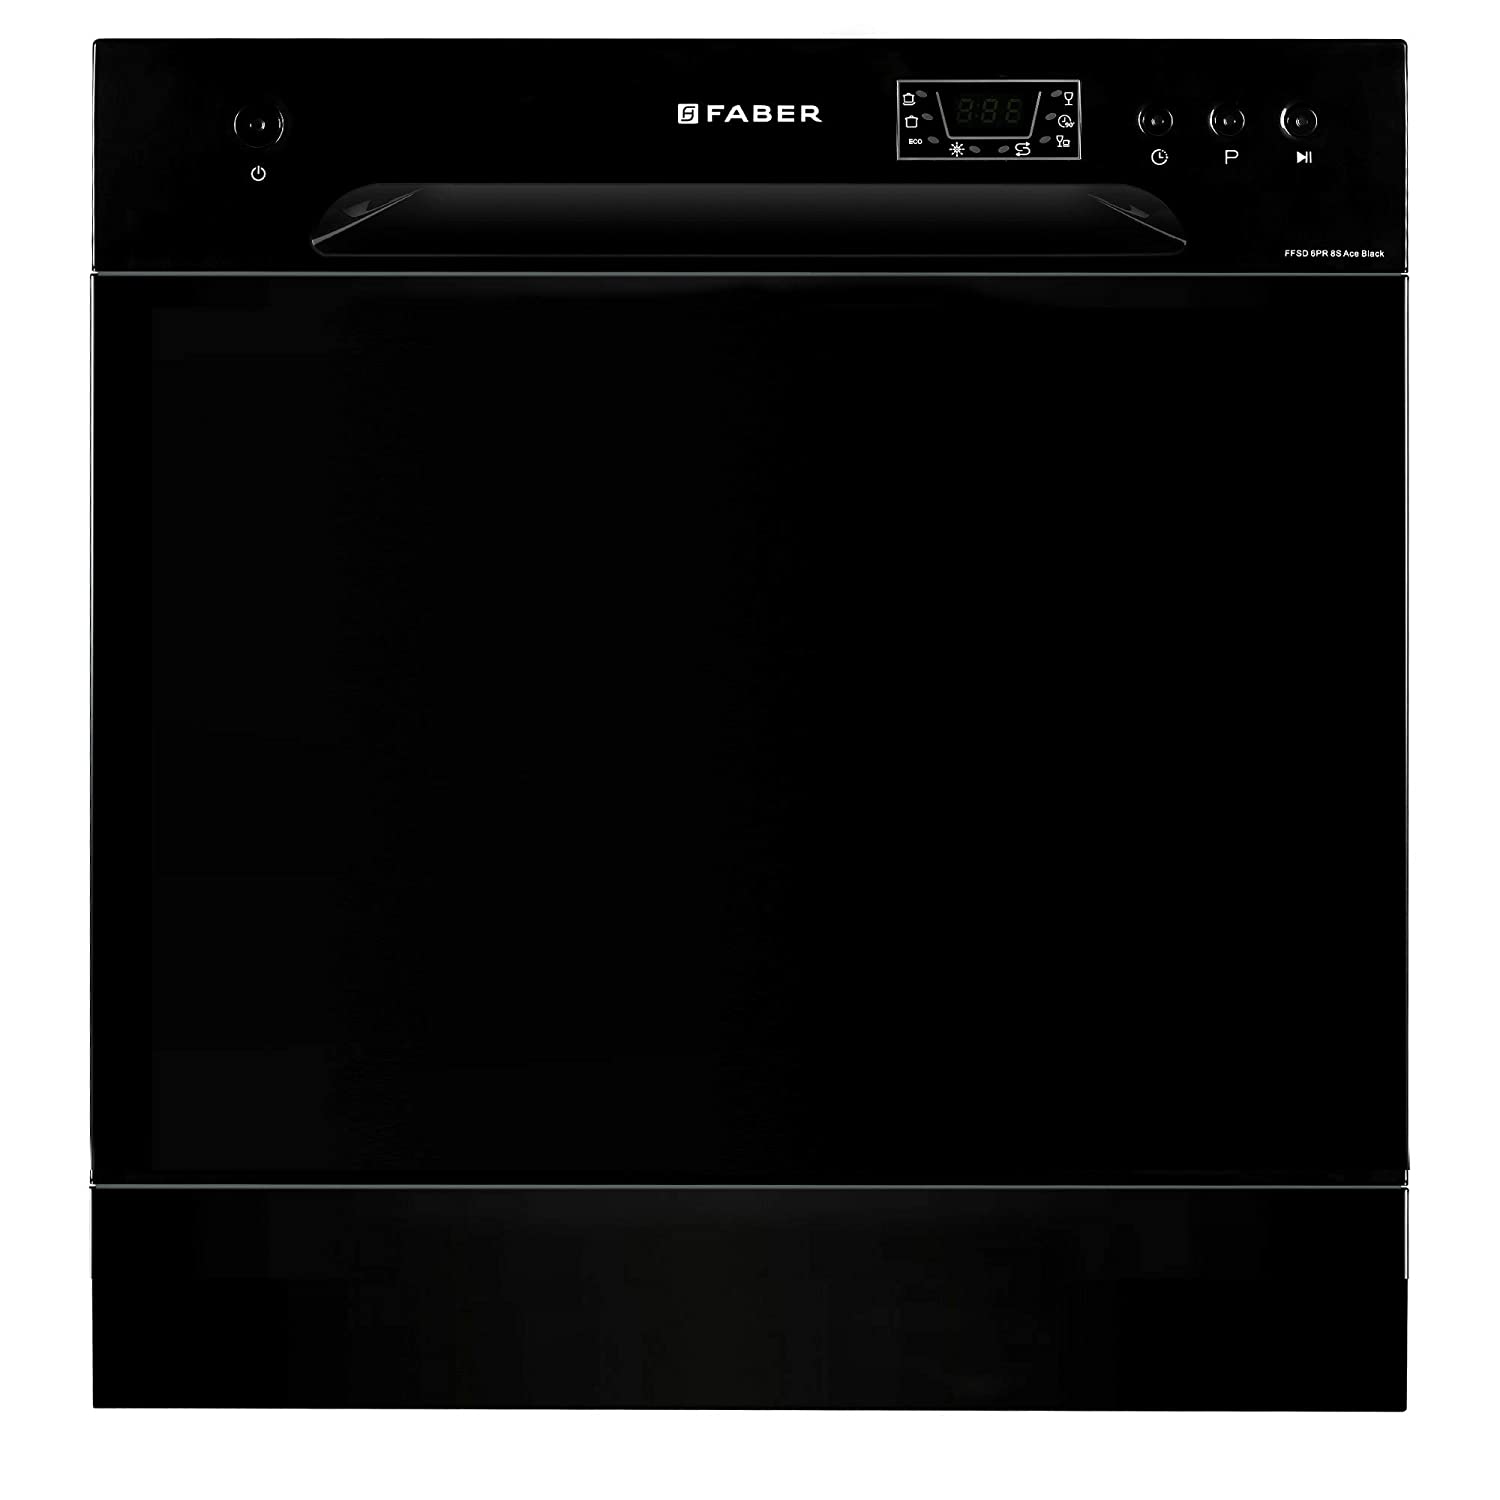 Faber Counter Top Dishwasher Review